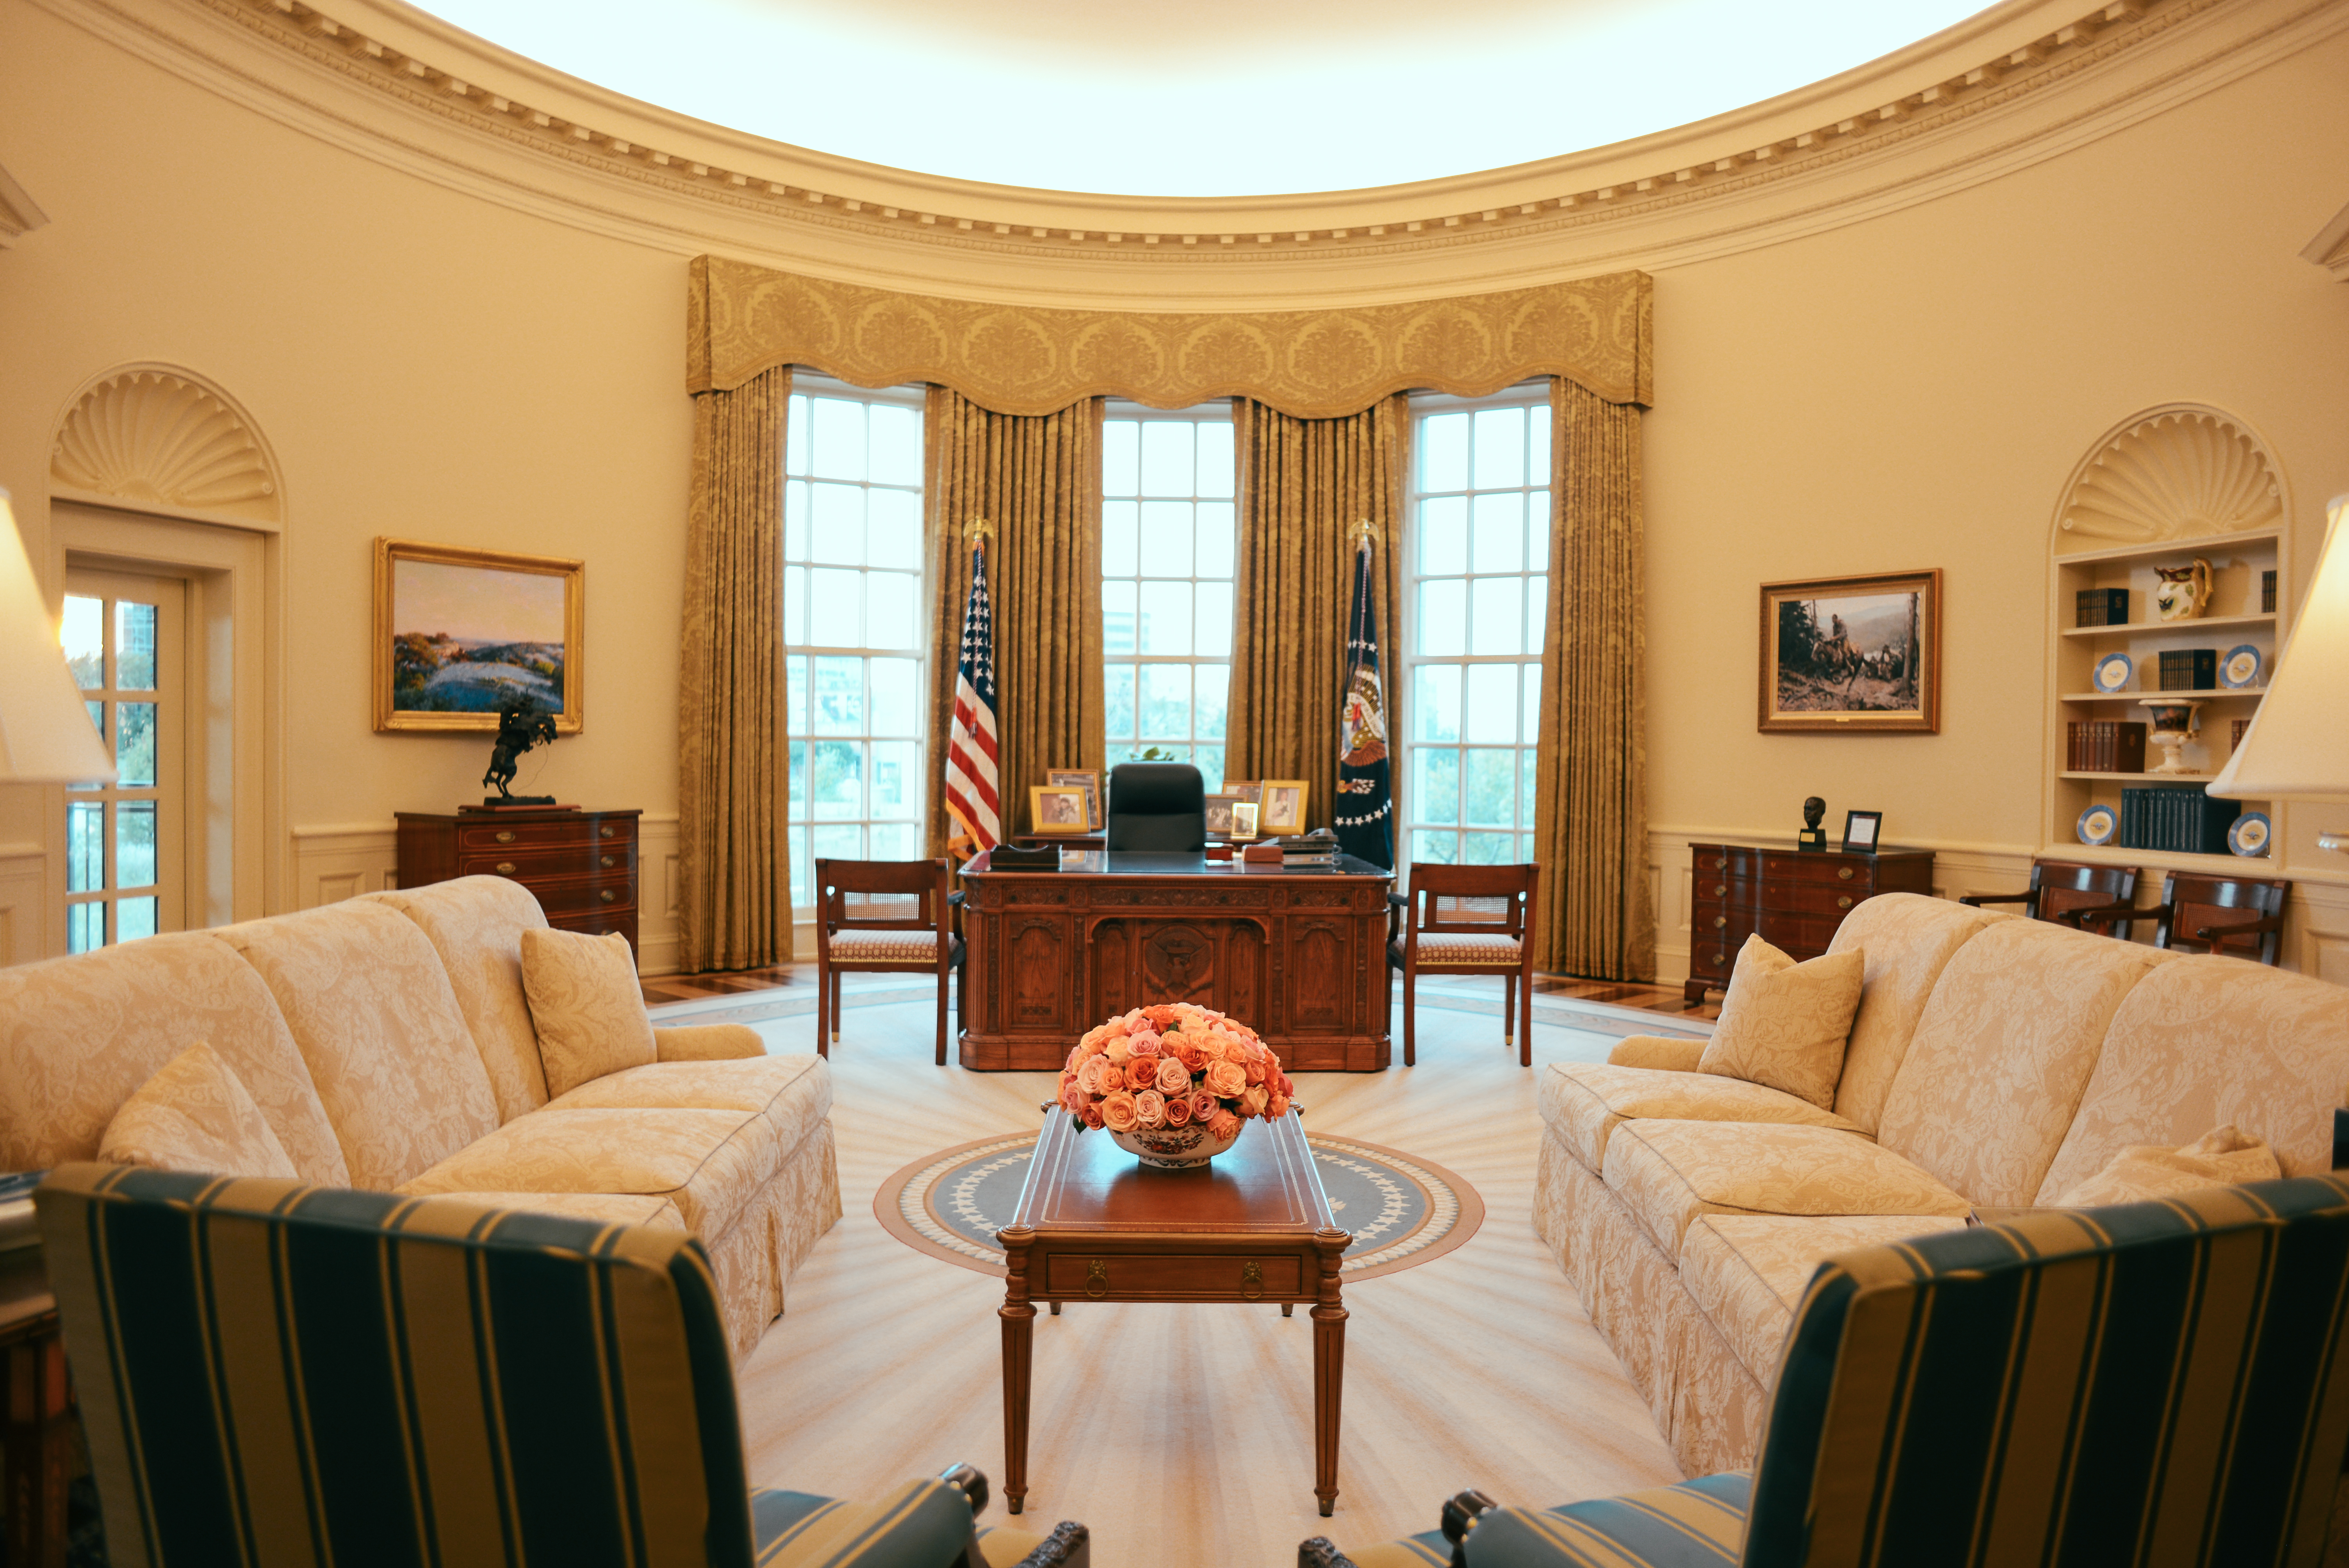 A full-size replica of the President's Oval Office, horizontal (landscape) view